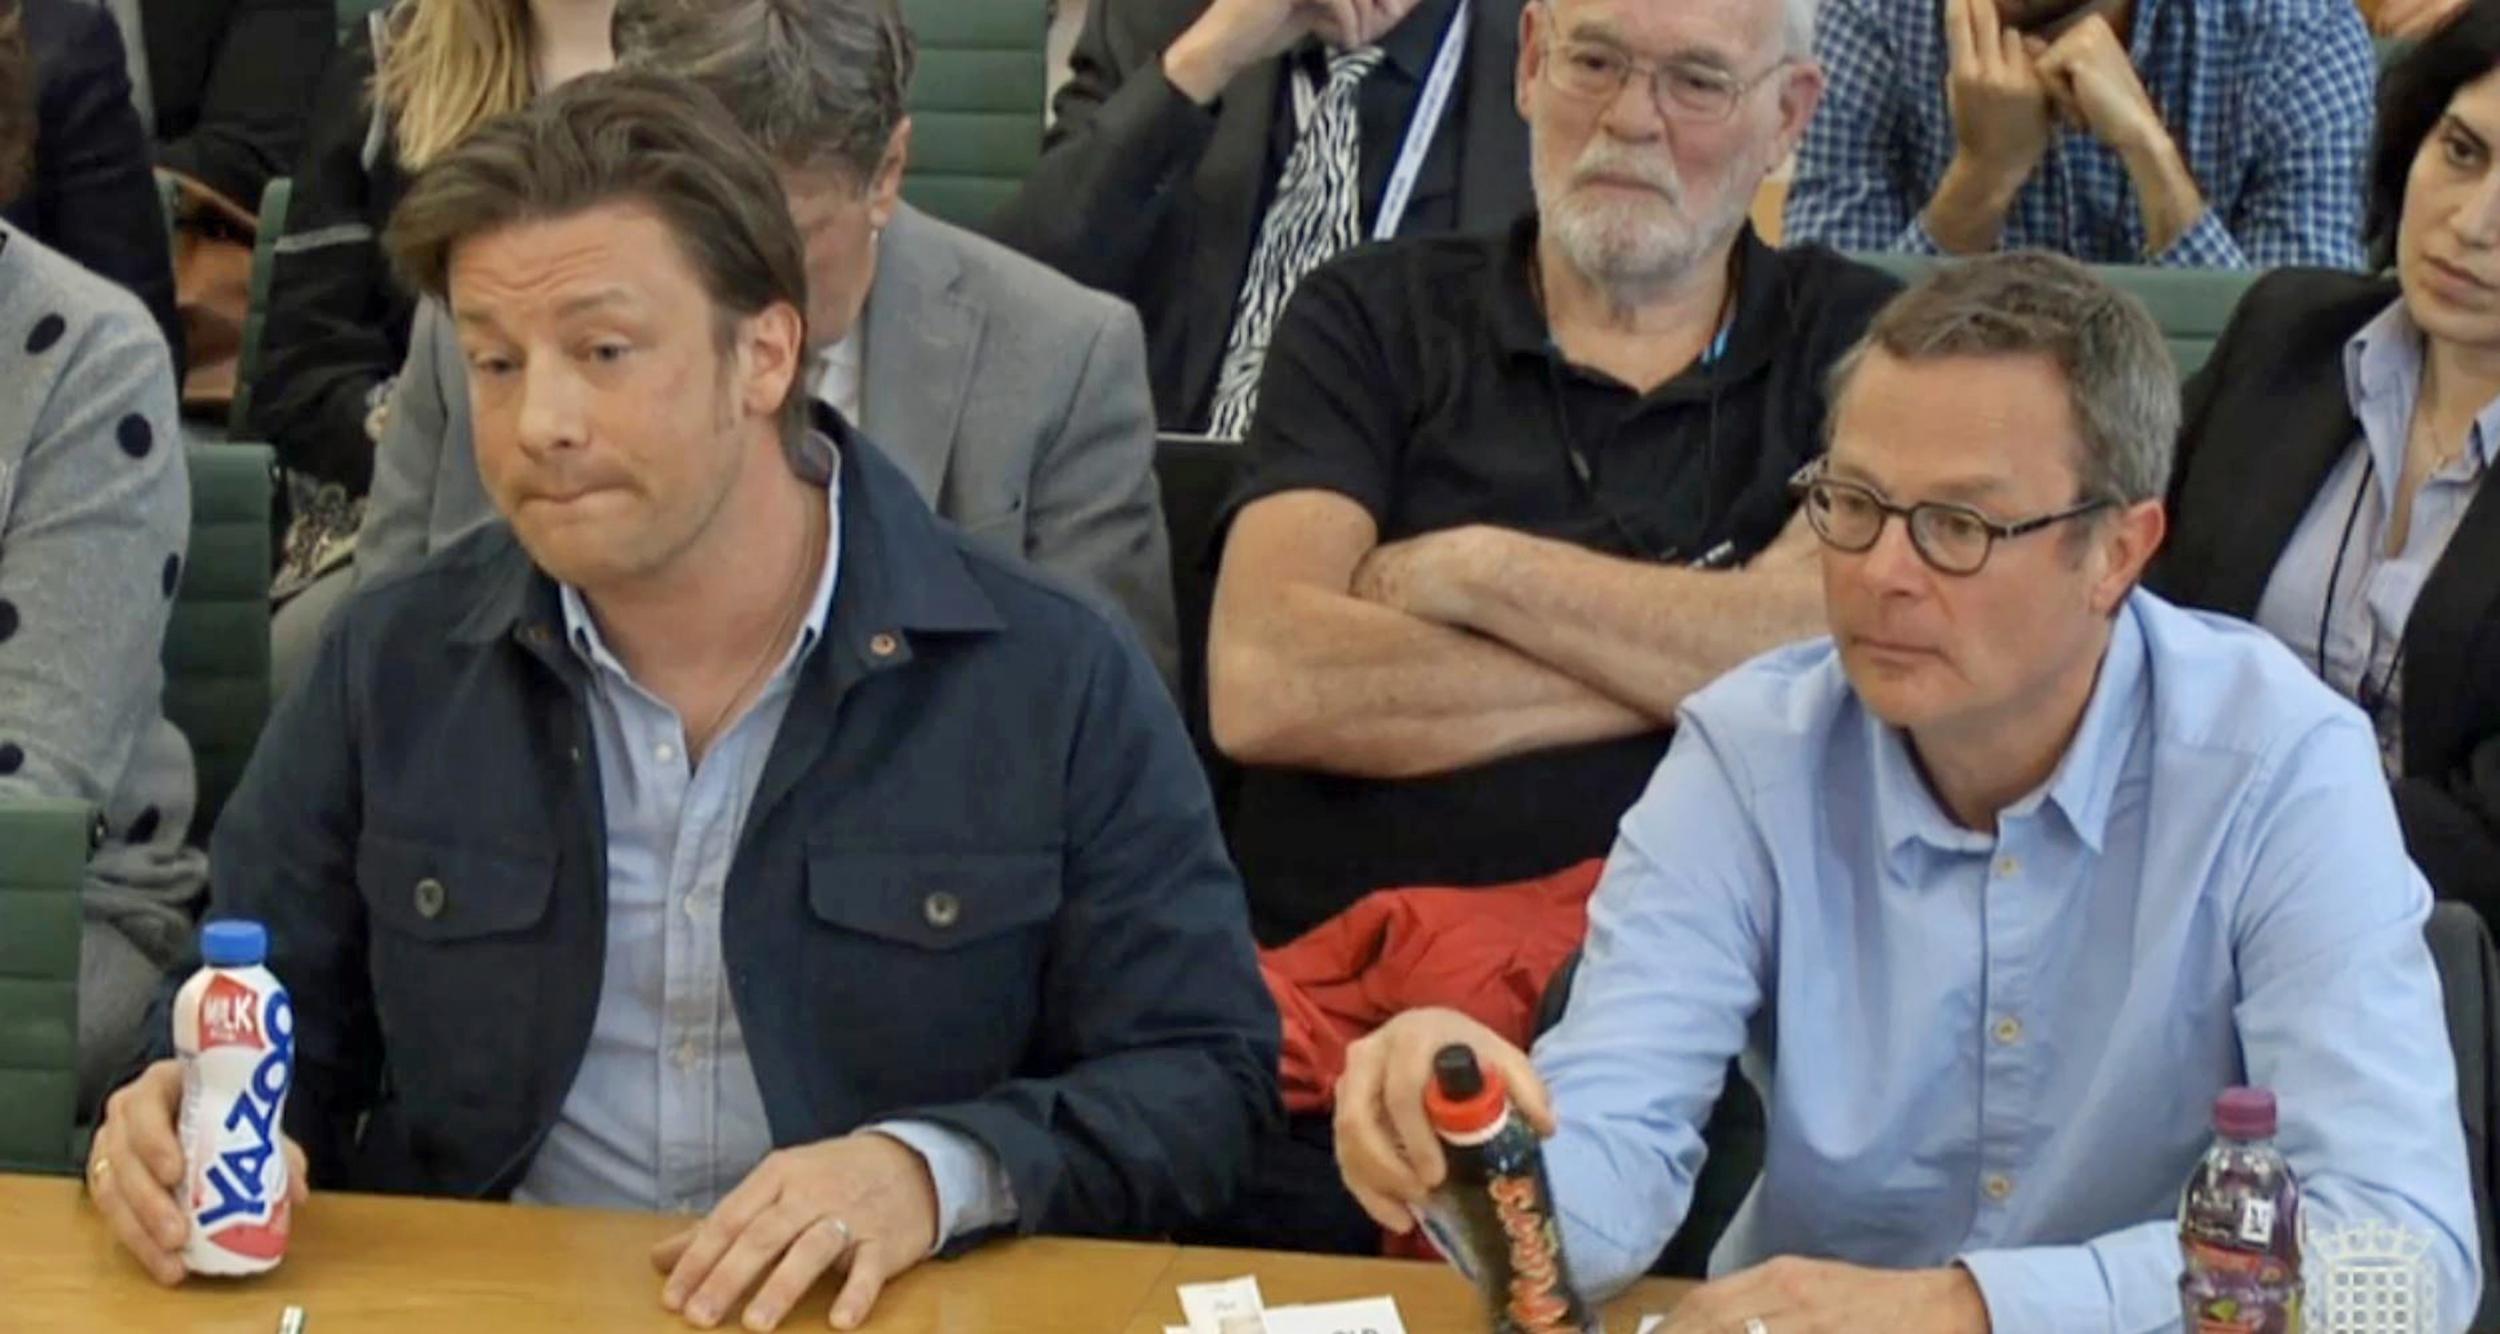 Jamie Oliver and Hugh Fearnley-Whittingstall giving evidence to the Health and Social Care Committee earlier this week